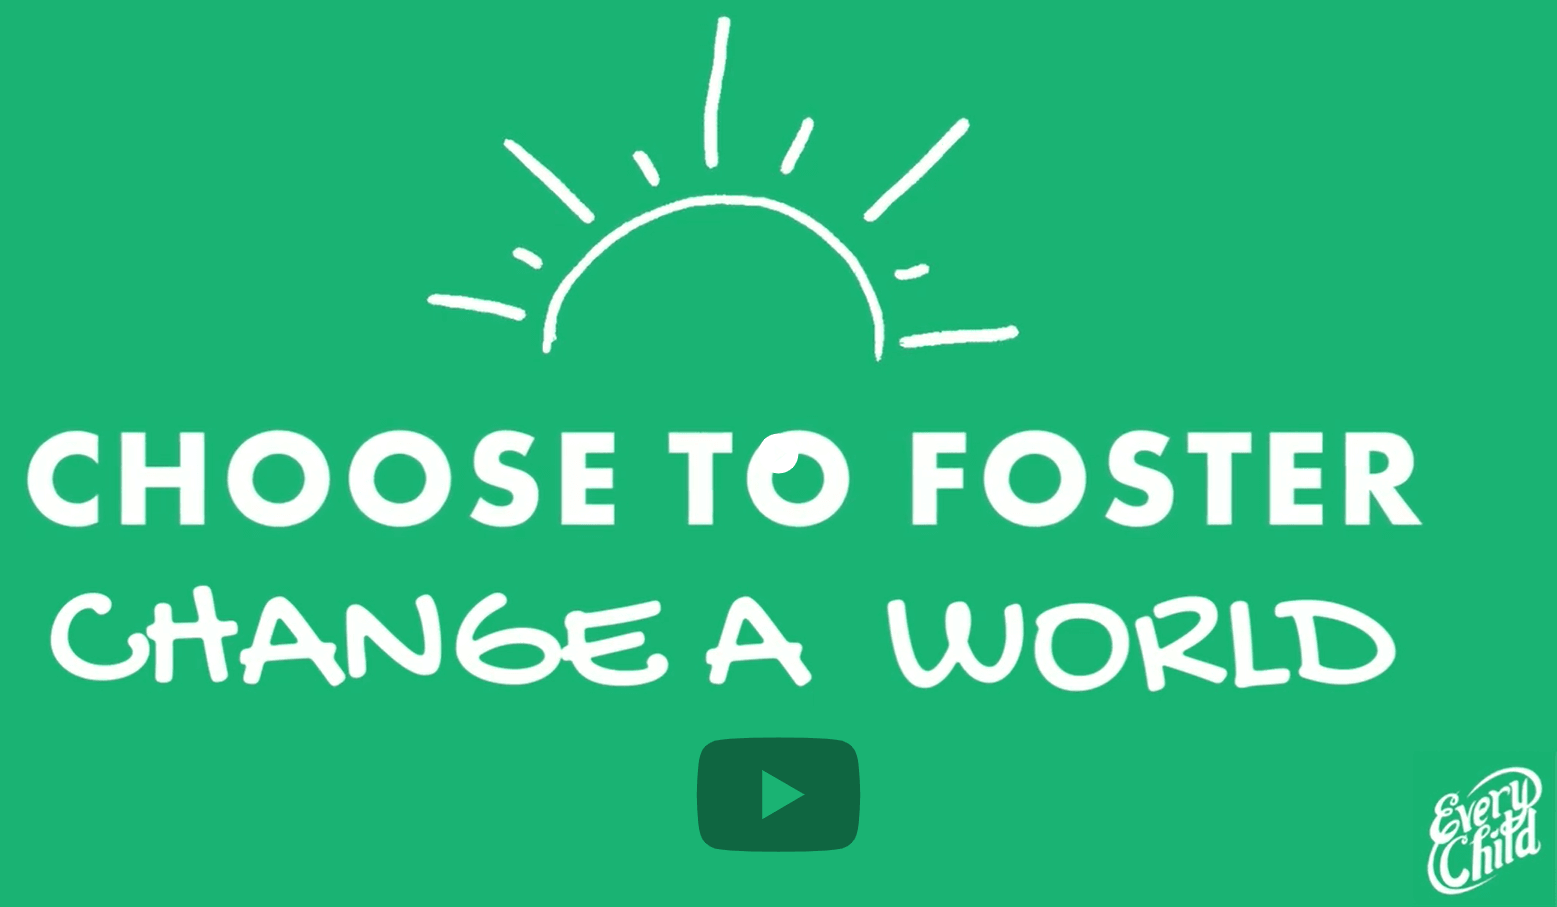 Choose to foster change a world